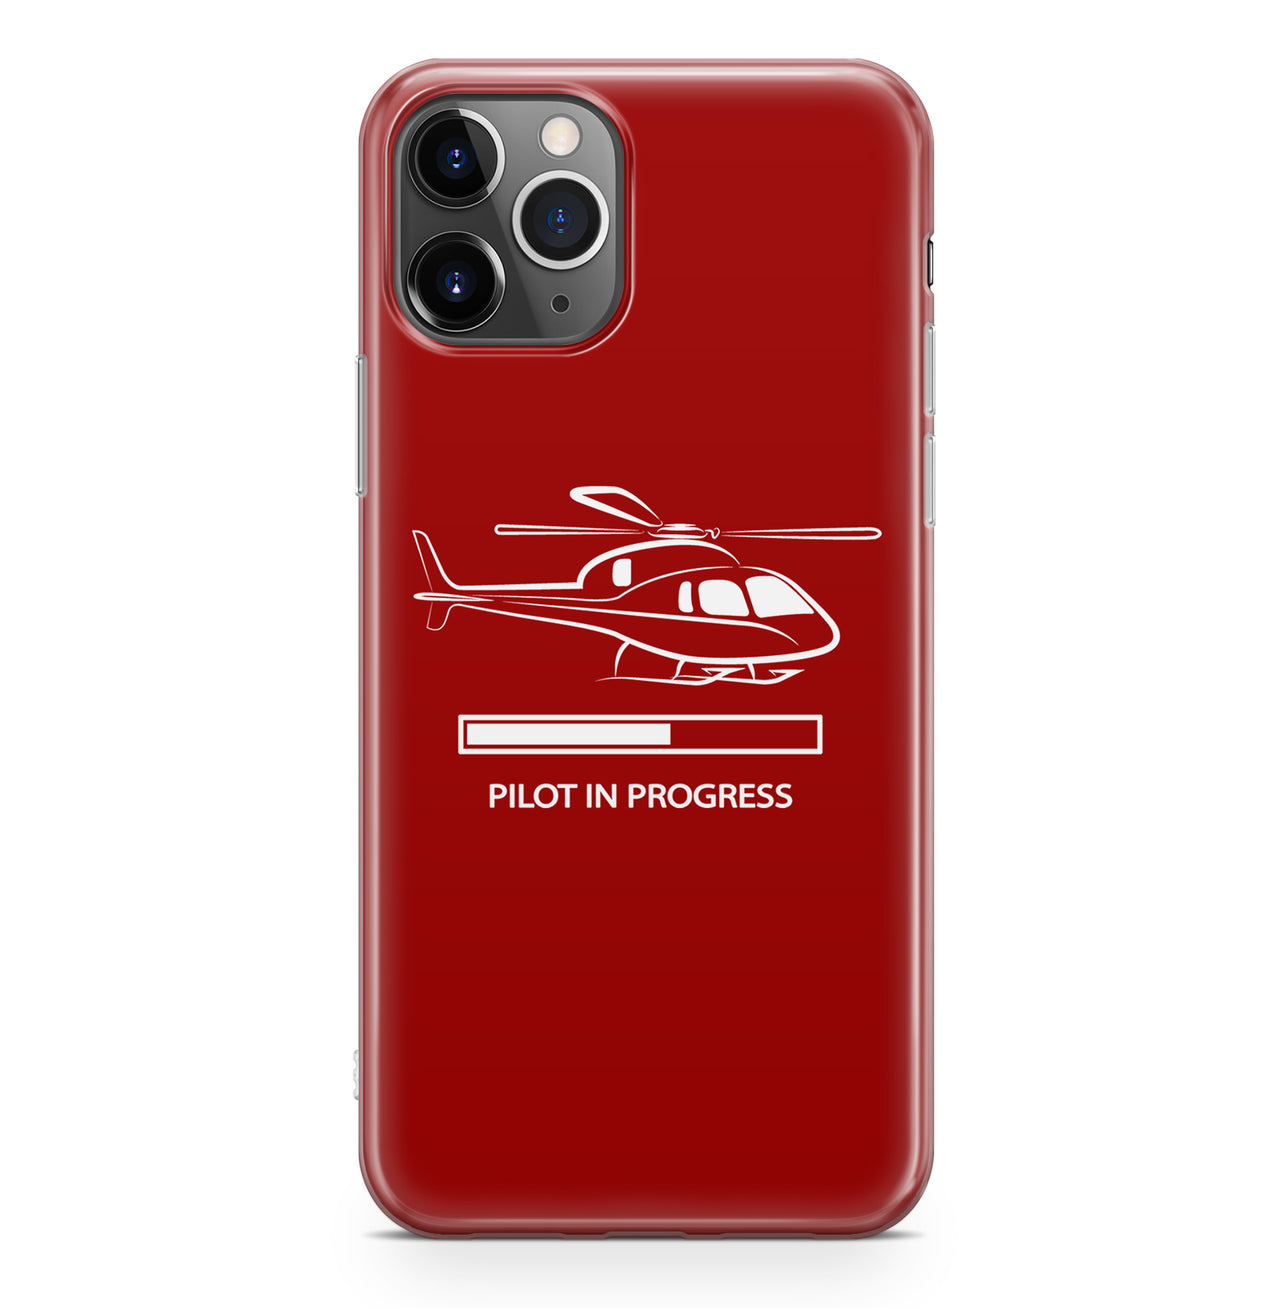 Pilot In Progress (Helicopter) Designed iPhone Cases